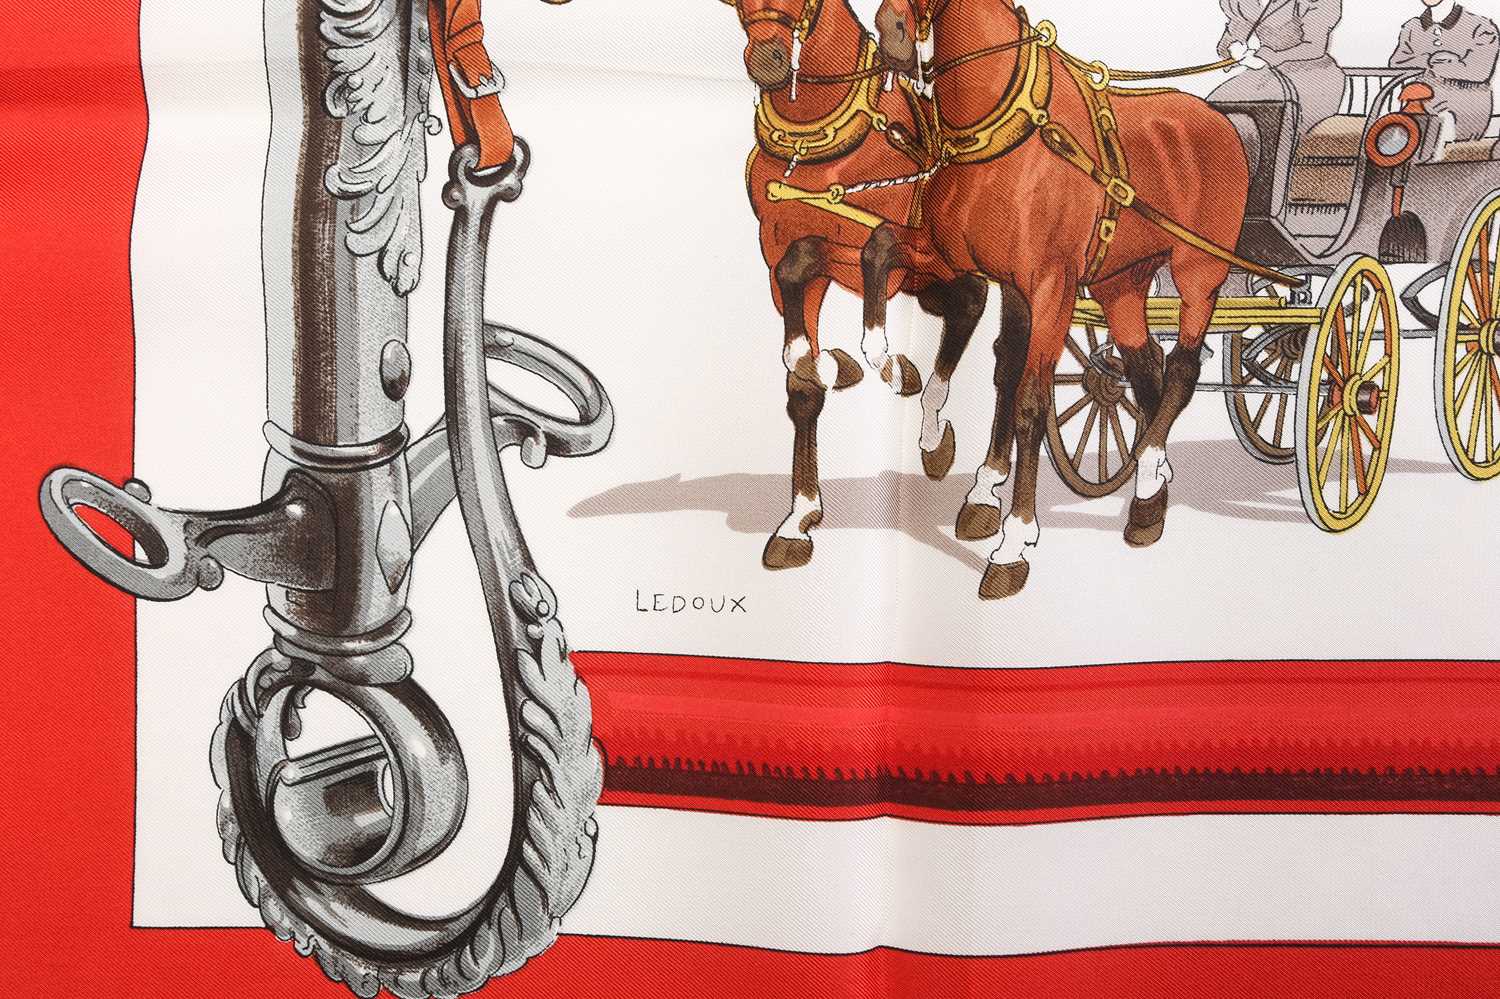 Hermès - 'Équipages (The Crew)' silk square scarf in red, of equestrian theme, designed by Phillippe - Image 6 of 7